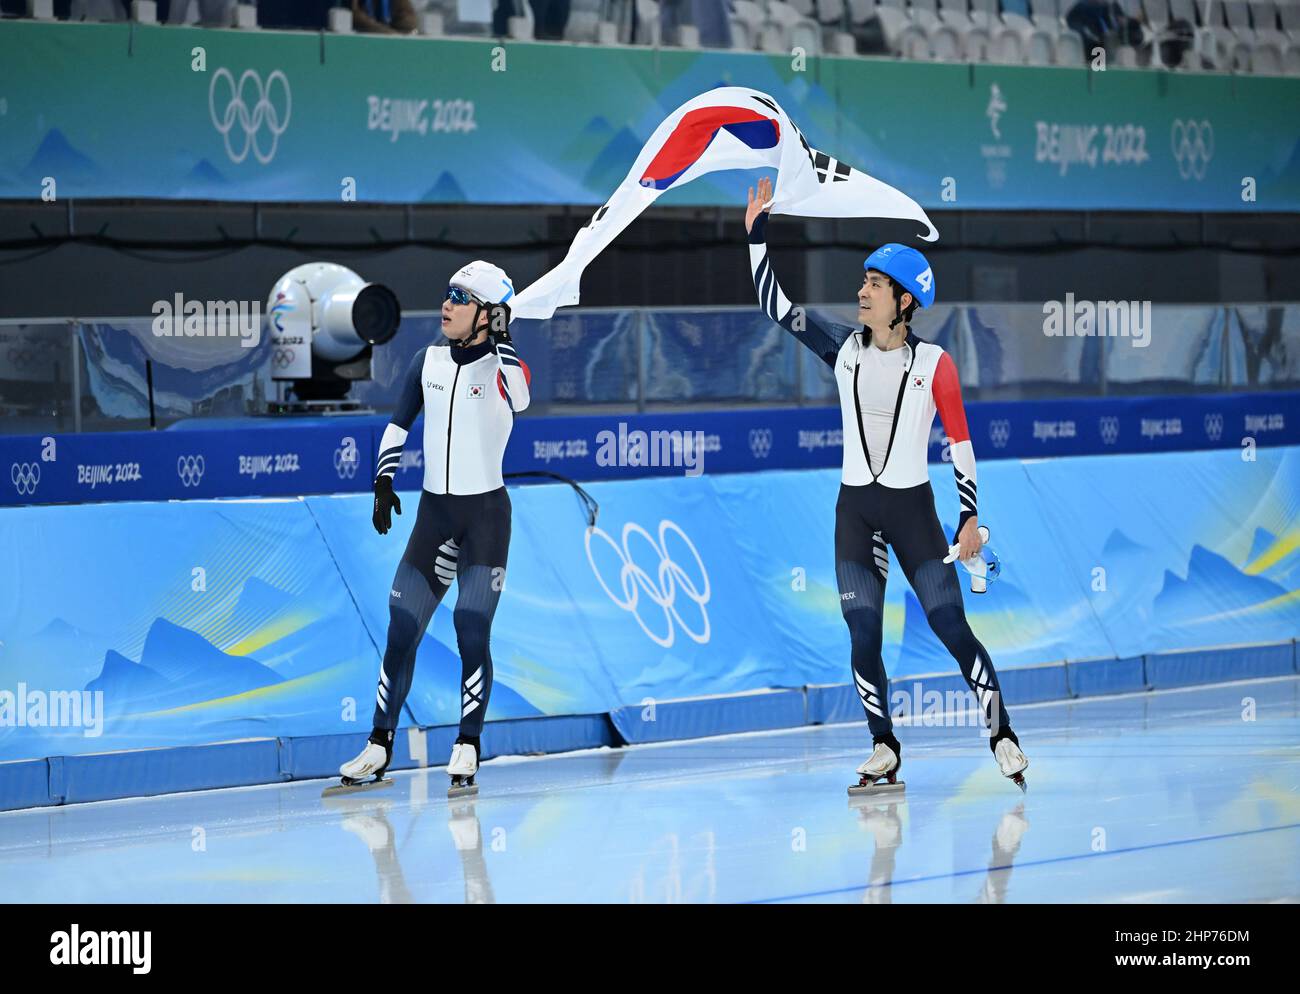 Beijing, China. 19th Feb, 2022. Chung Jae Won (L) and Lee Seung Hoon (L) of South Korea celebrate after the speed skating men's mass start final of Beijing 2022 Winter Olympics at the National Speed Skating Oval in Beijing, capital of China, Feb. 19, 2022. Credit: Wu Wei/Xinhua/Alamy Live News Stock Photo